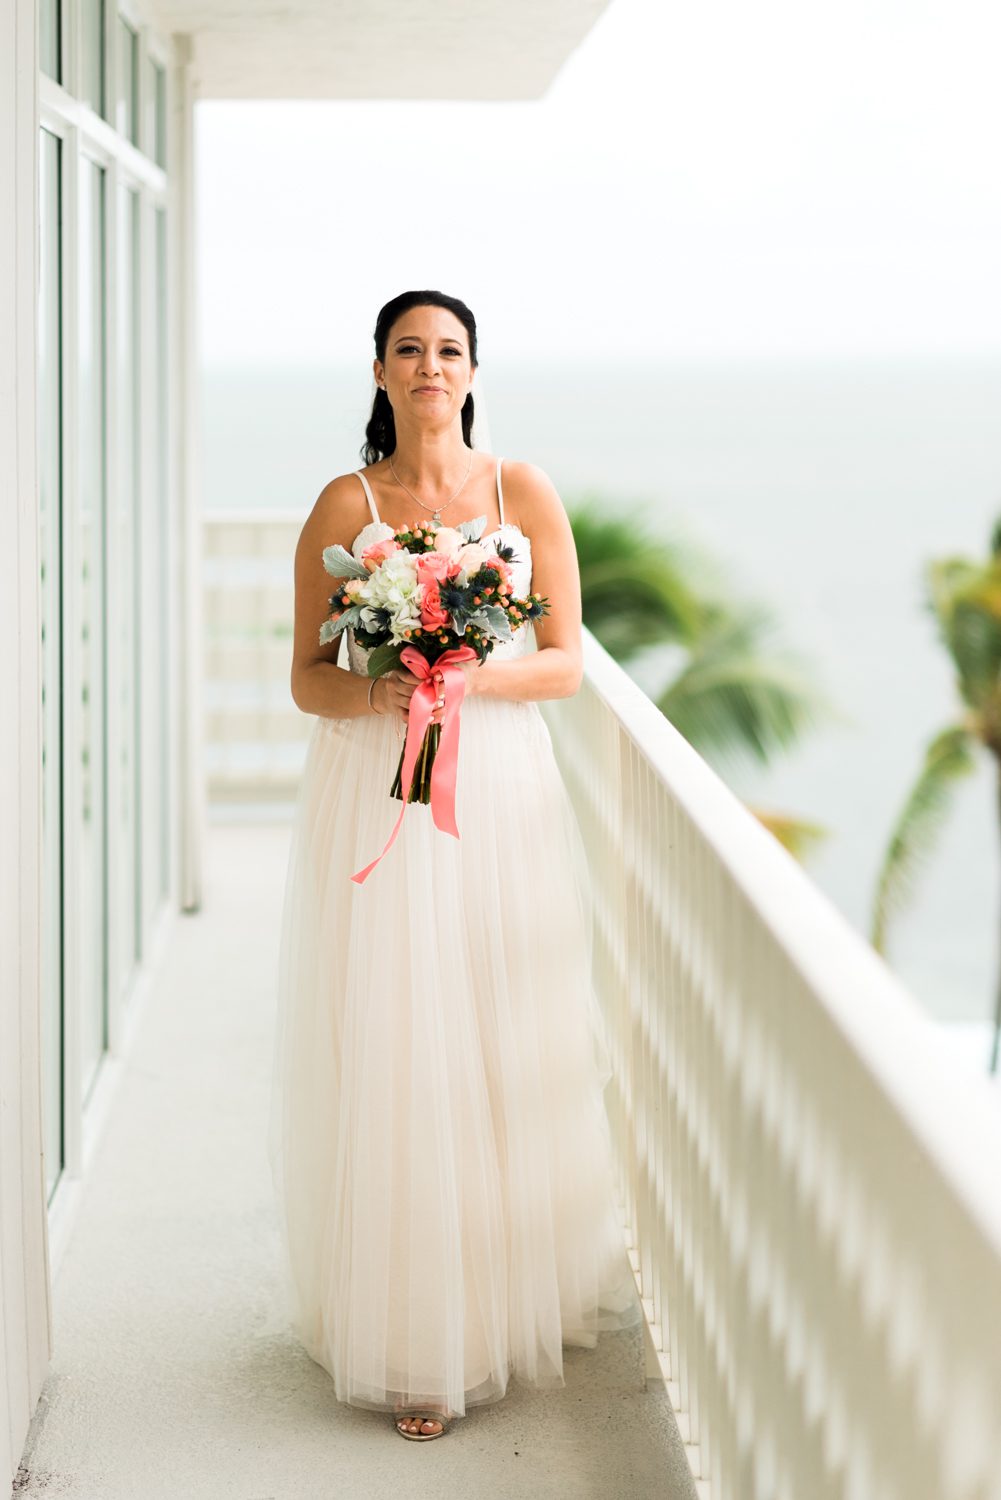 A bride holding a bouquet on a balcony overlooking the Florida Keys.